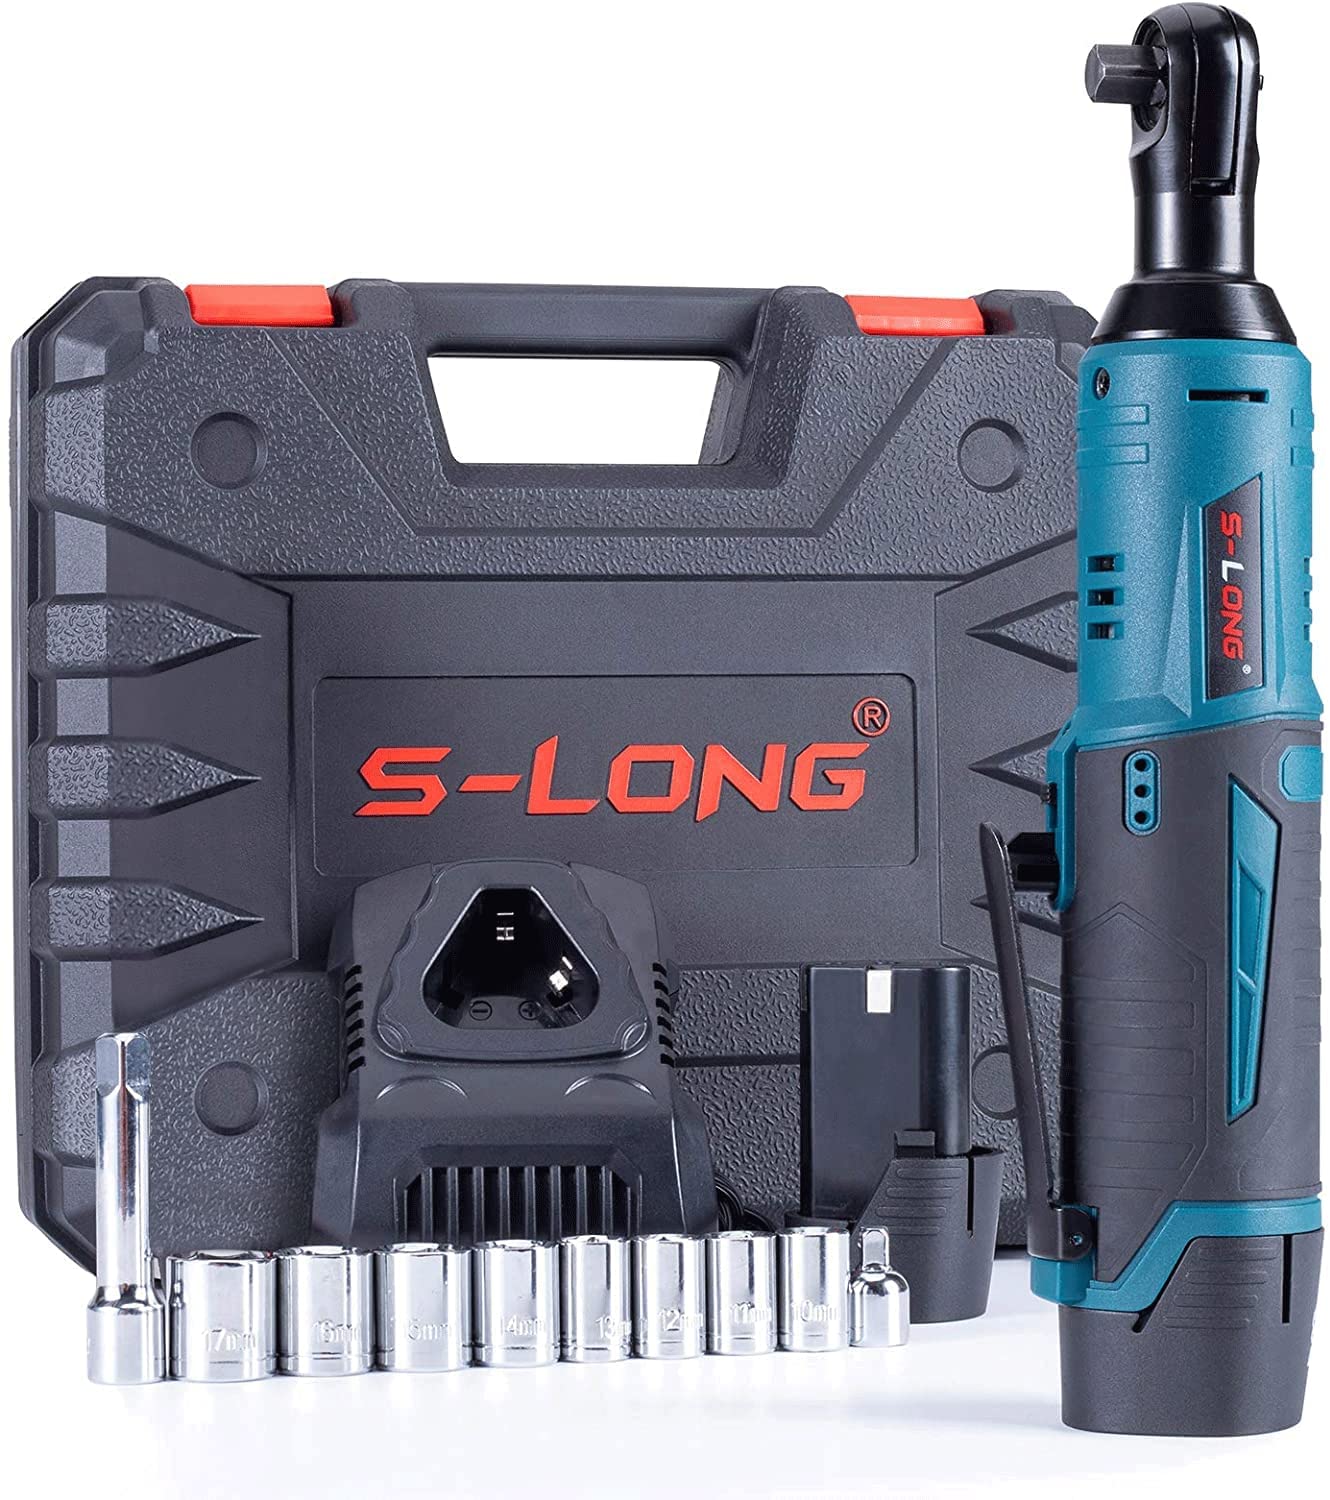 S-LONG Cordless Electric Ratchet Wrench Set